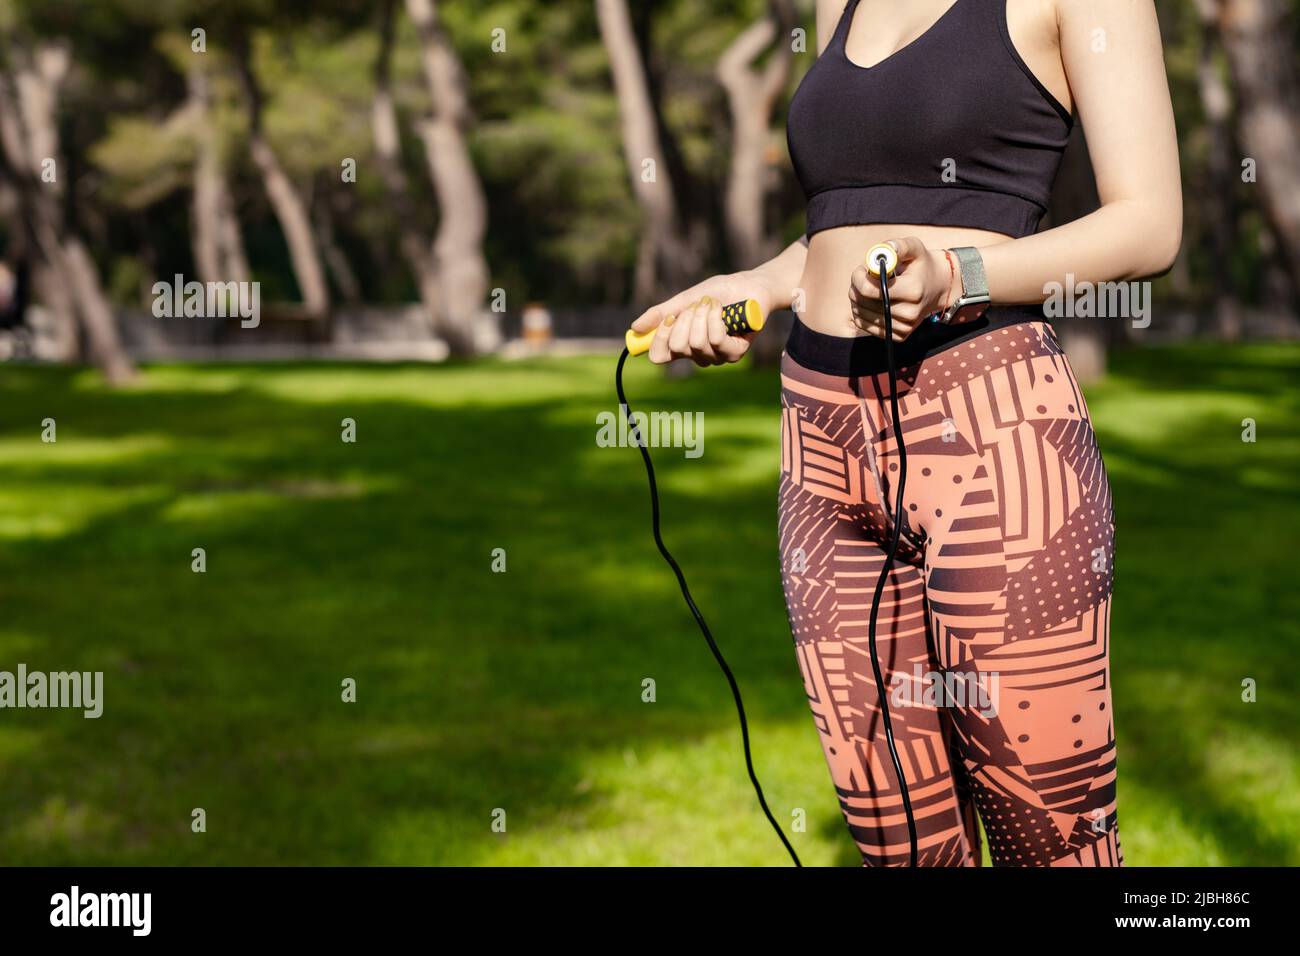 https://c8.alamy.com/comp/2JBH86C/beautiful-redhead-woman-wearing-black-sports-bra-standing-on-city-park-outdoors-flat-stomach-with-a-skipping-rope-in-her-hands-at-waist-level-health-2JBH86C.jpg